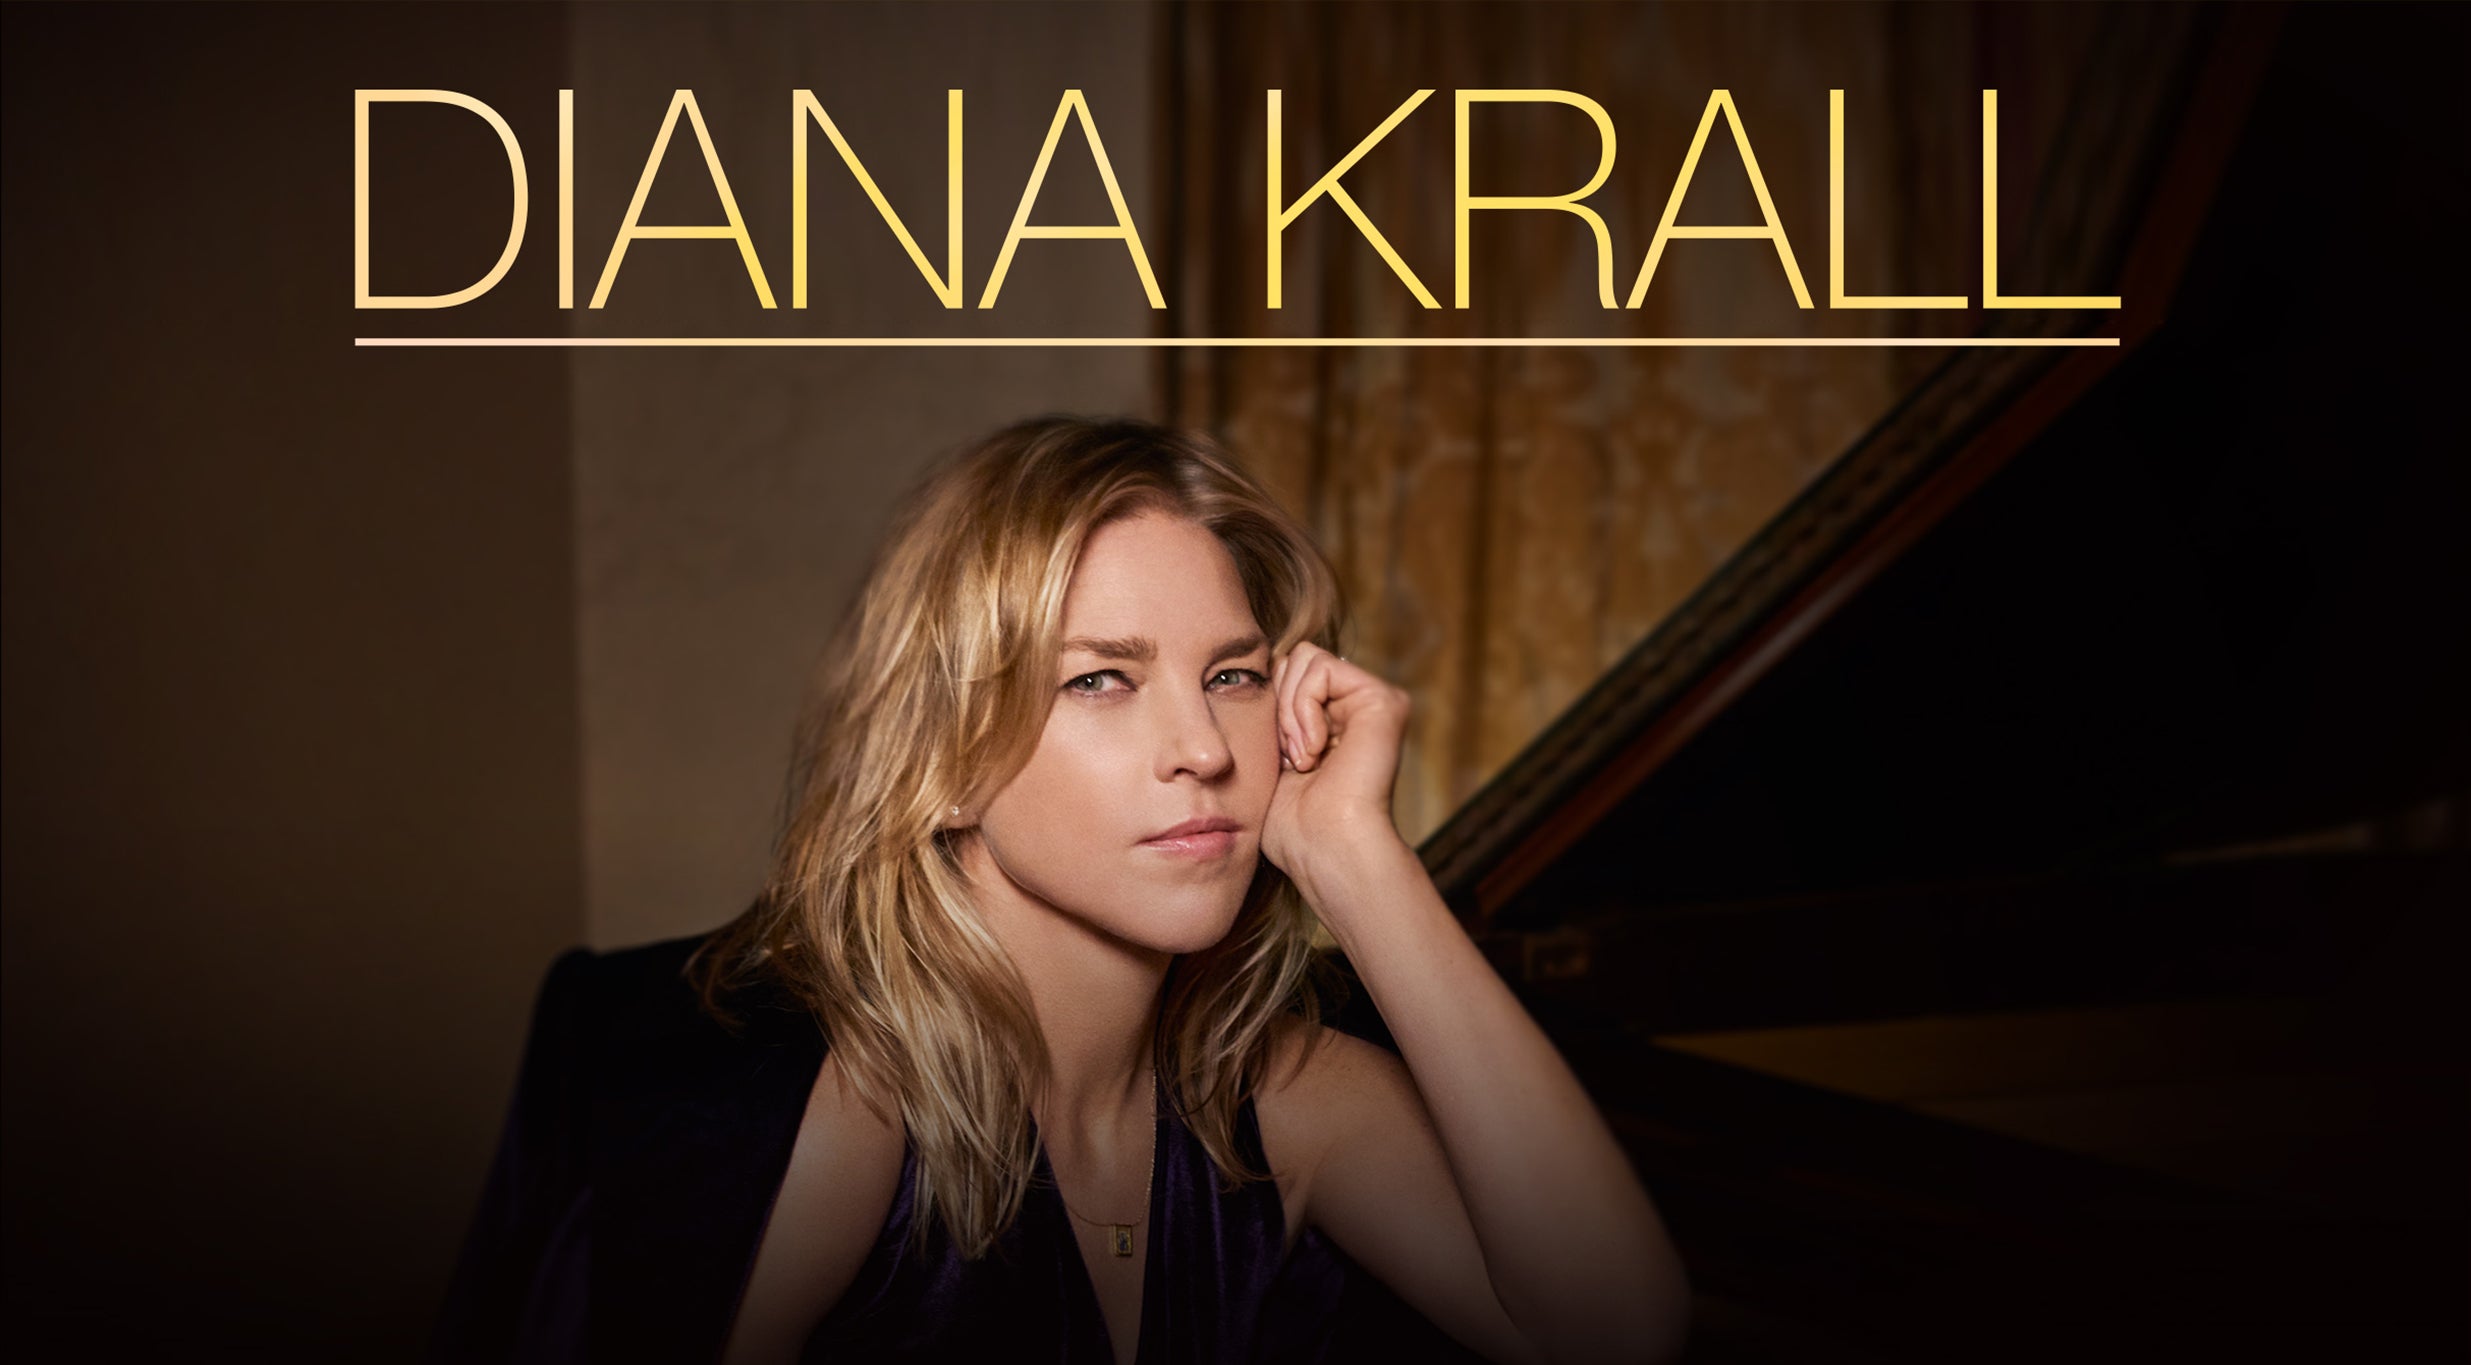 Diana Krall in Hershey promo photo for Official Platinum presale offer code